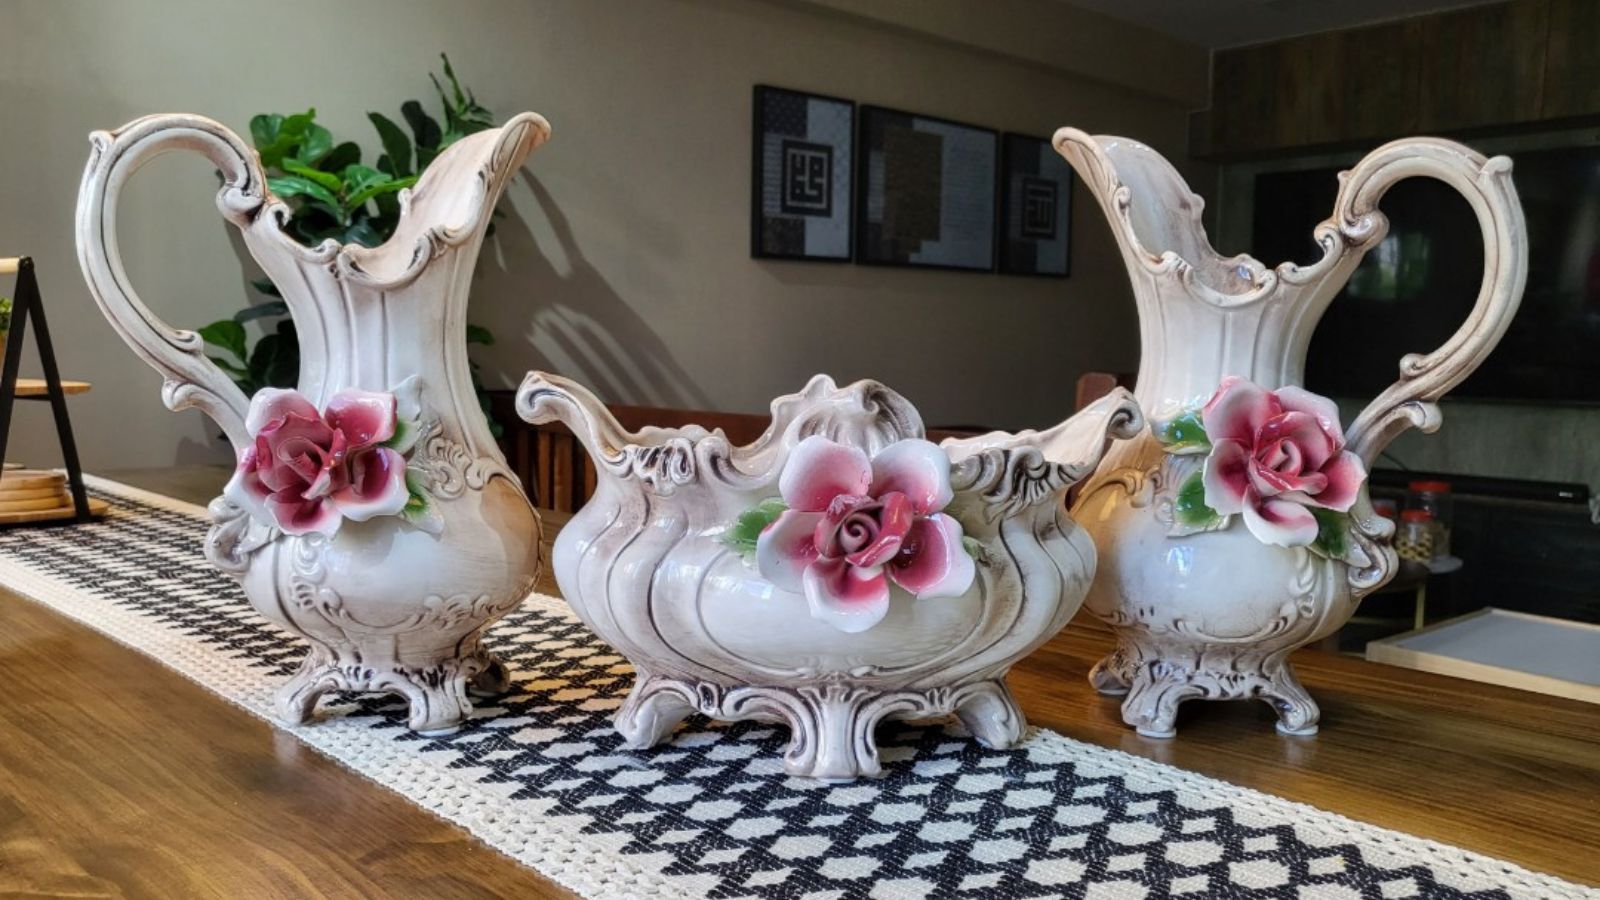 How to Clean Capodimonte Porcelain